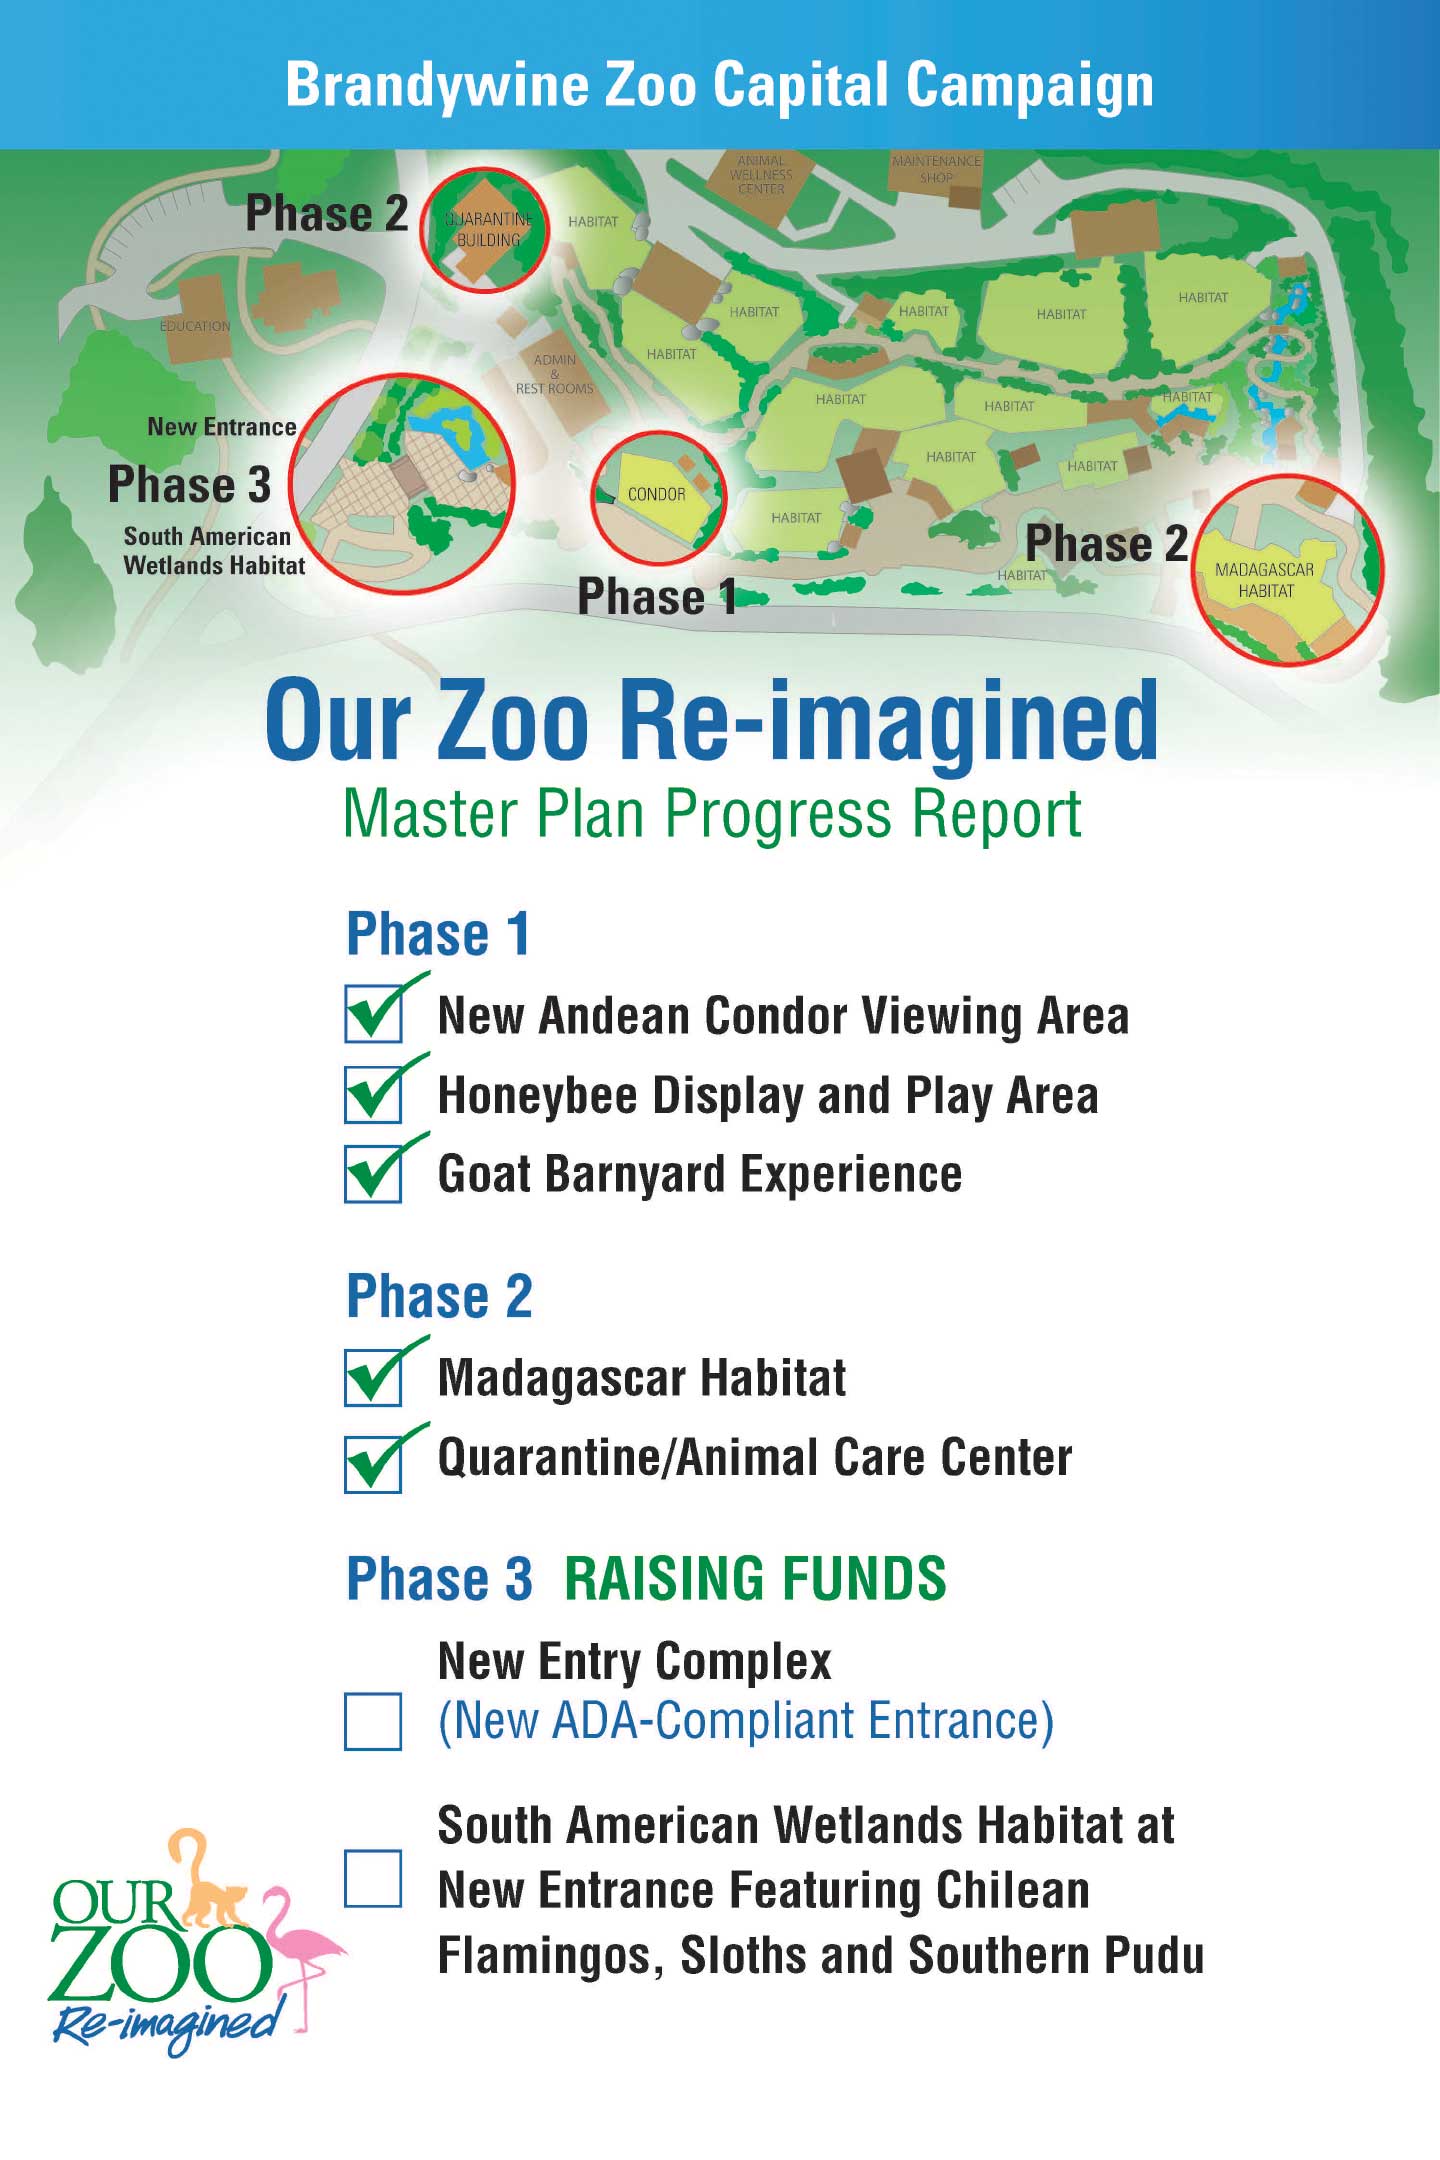 Our Zoo Re-imagined check list